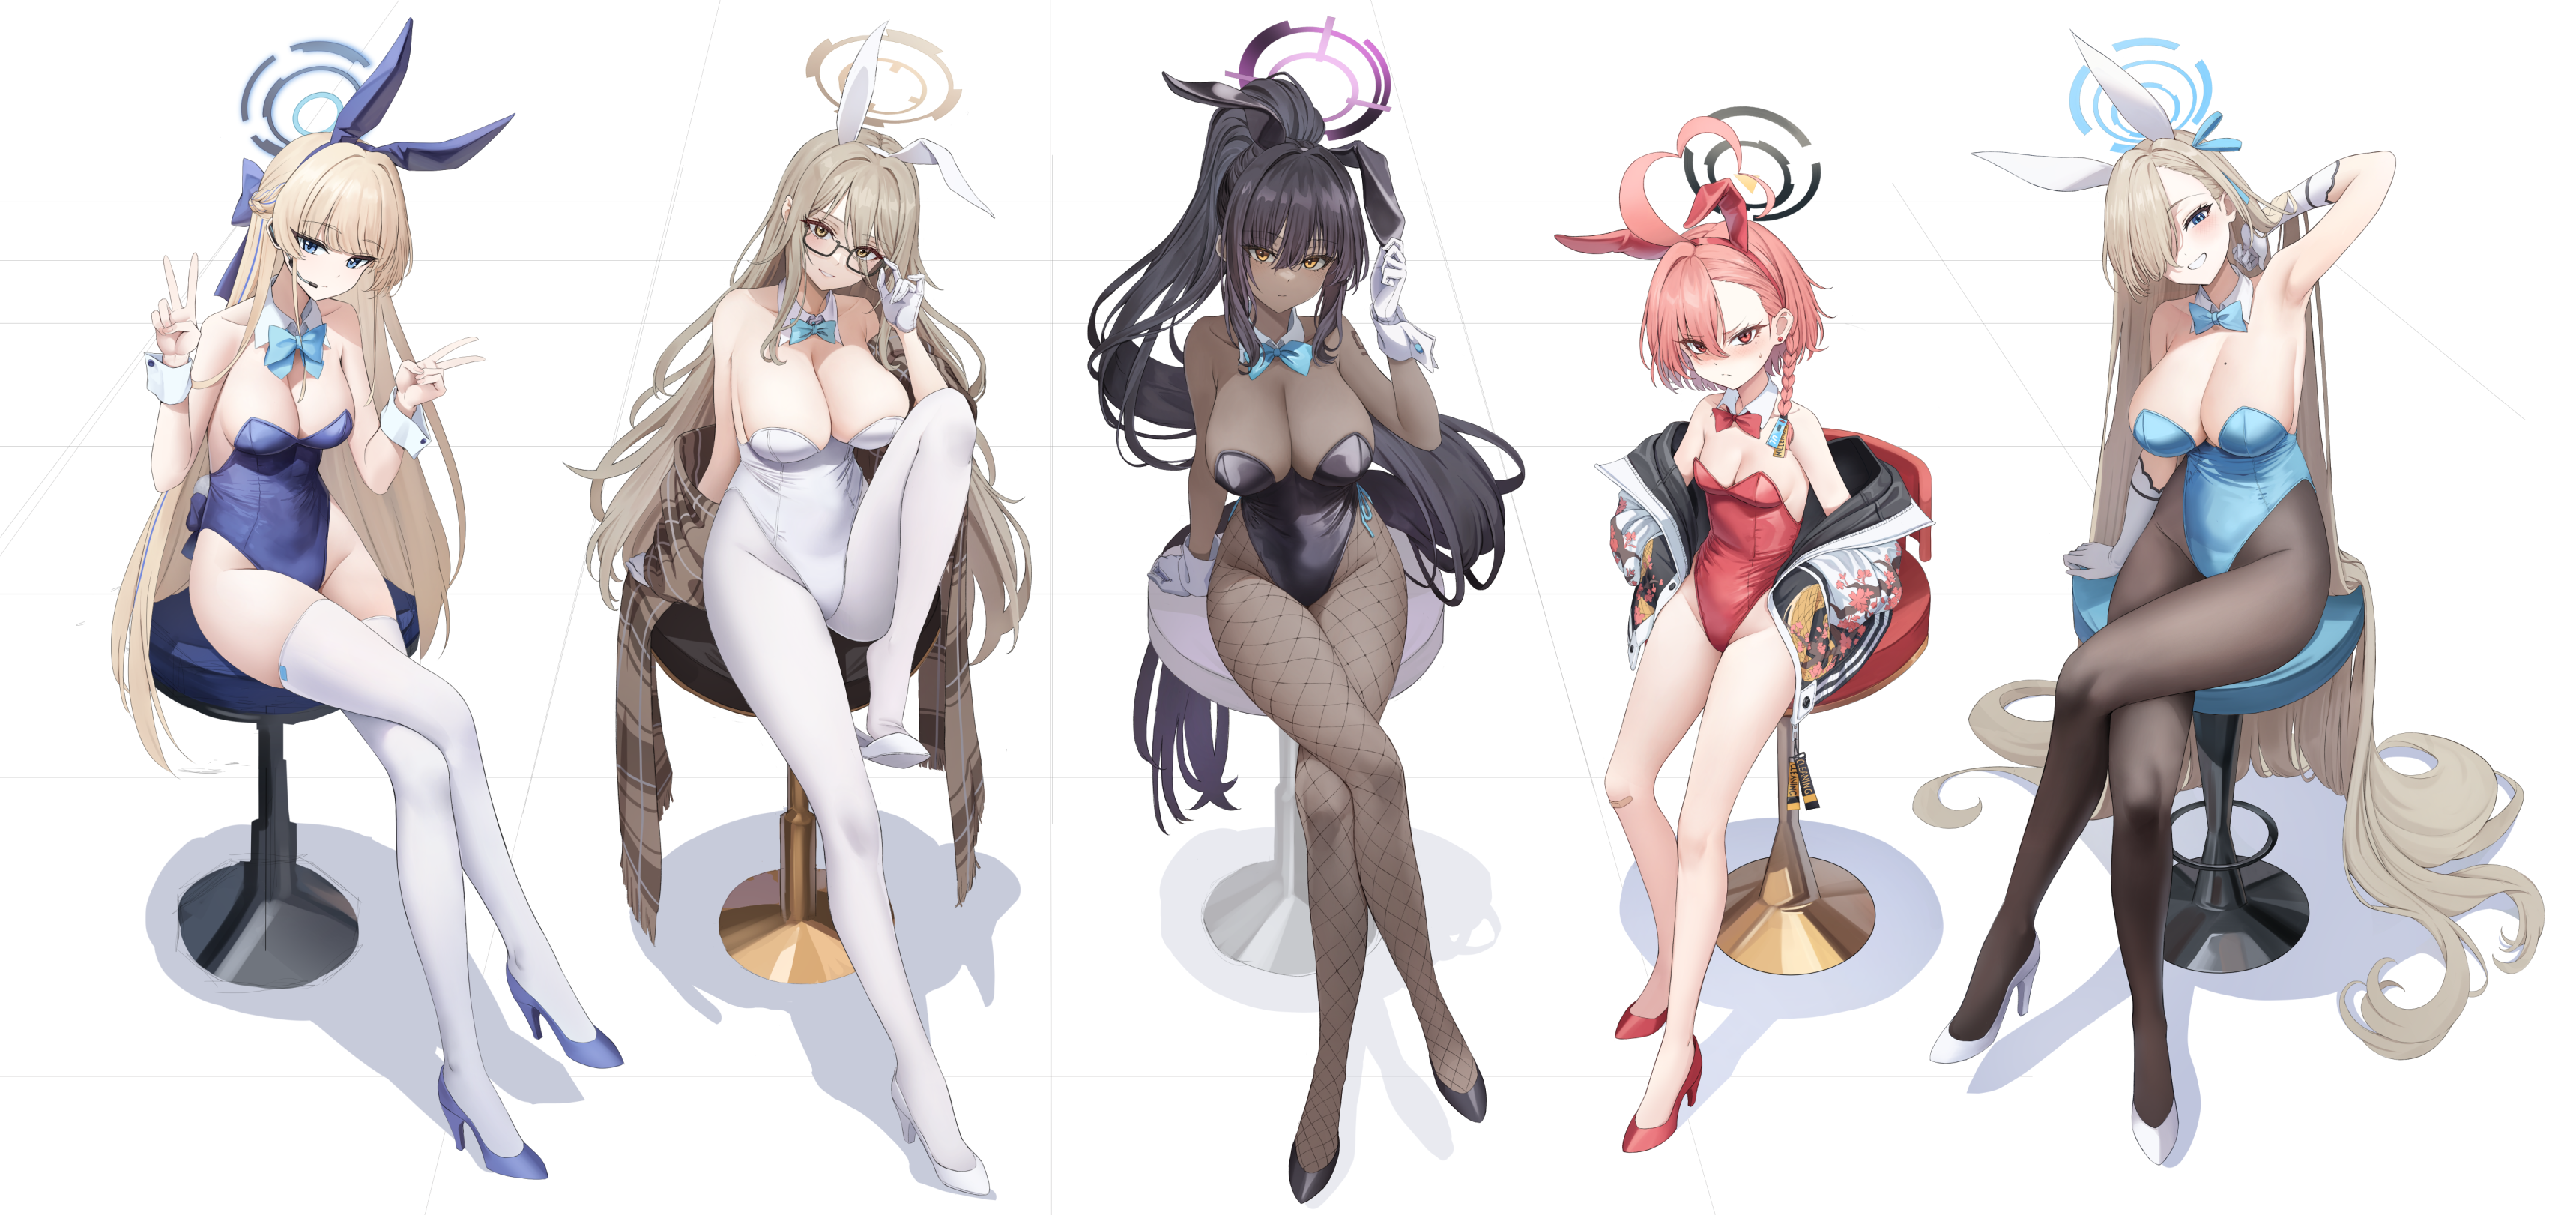 Anime 3438x1621 anime girls Blue Archive video games Asuma Toki (Blue Archive) Kakudate Karin Mikamo Neru Murokasa Akane ChiRang animal ears bunny ears bunny girl heels glasses no bra pantyhose tail tattoo thigh-highs legs crossed fishnet stockings cleavage big boobs bow tie looking at viewer sitting simple background gloves long hair bunny suit hair over one eye moles mole on breast line-up Asuna Ichinose fishnet pantyhose stools red leotard black leotard blue leotard white leotard